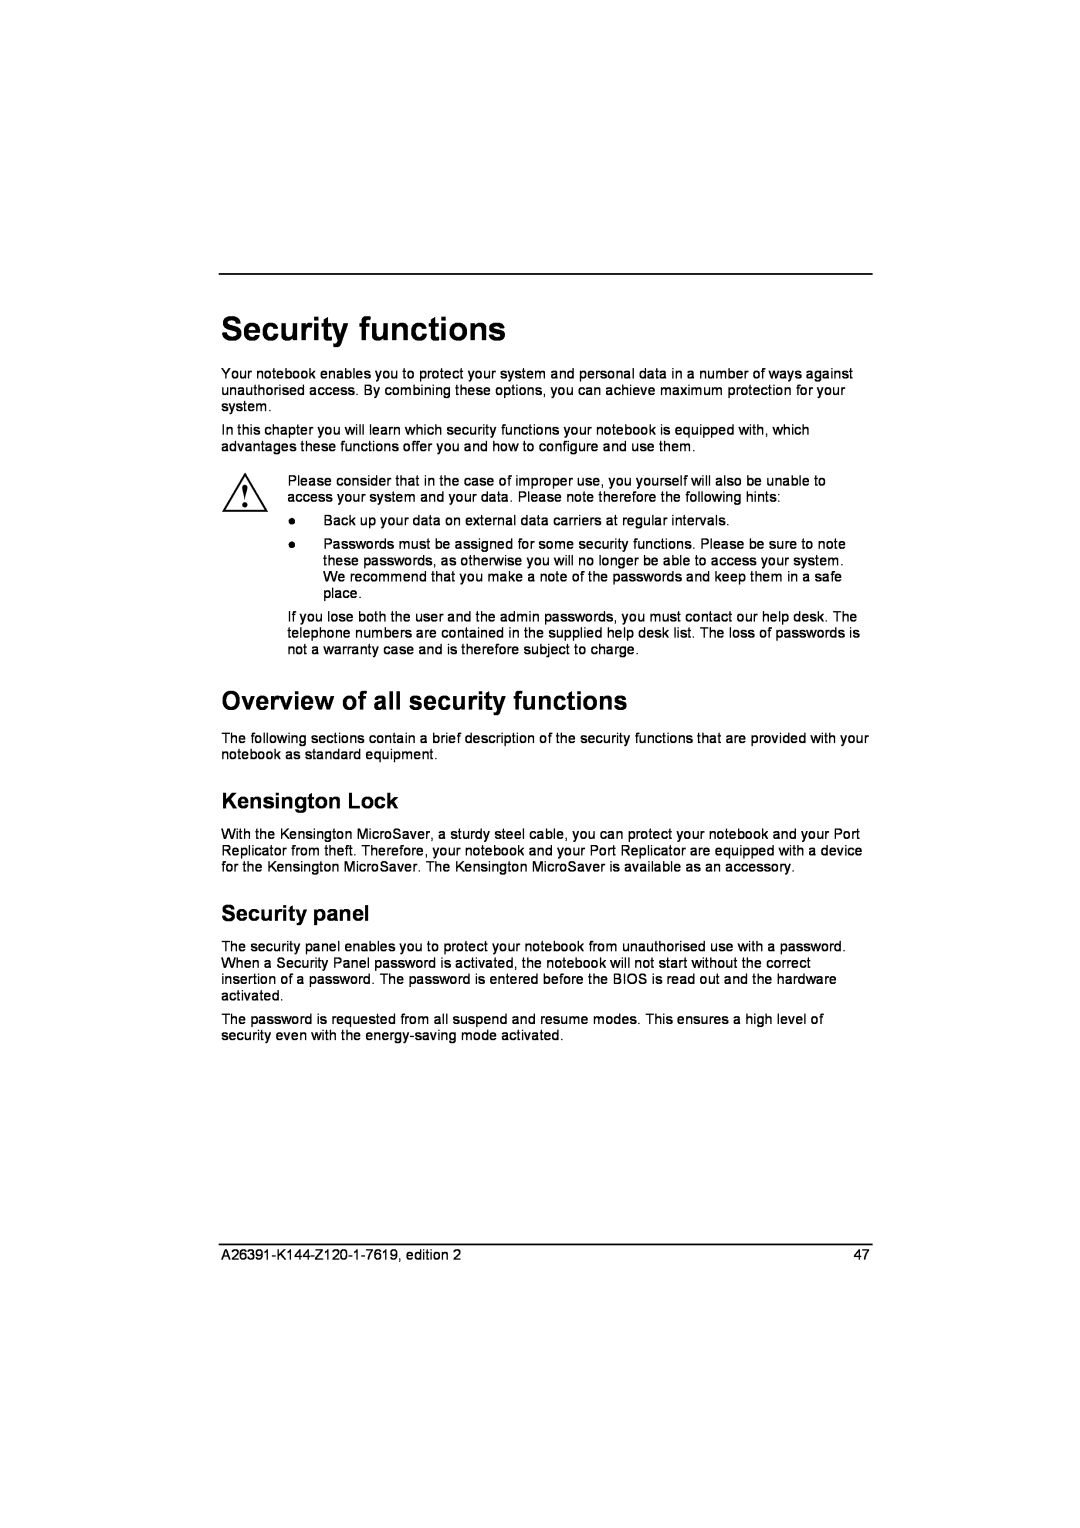 Fujitsu S SERIES manual Security functions, Overview of all security functions, Kensington Lock, Security panel 